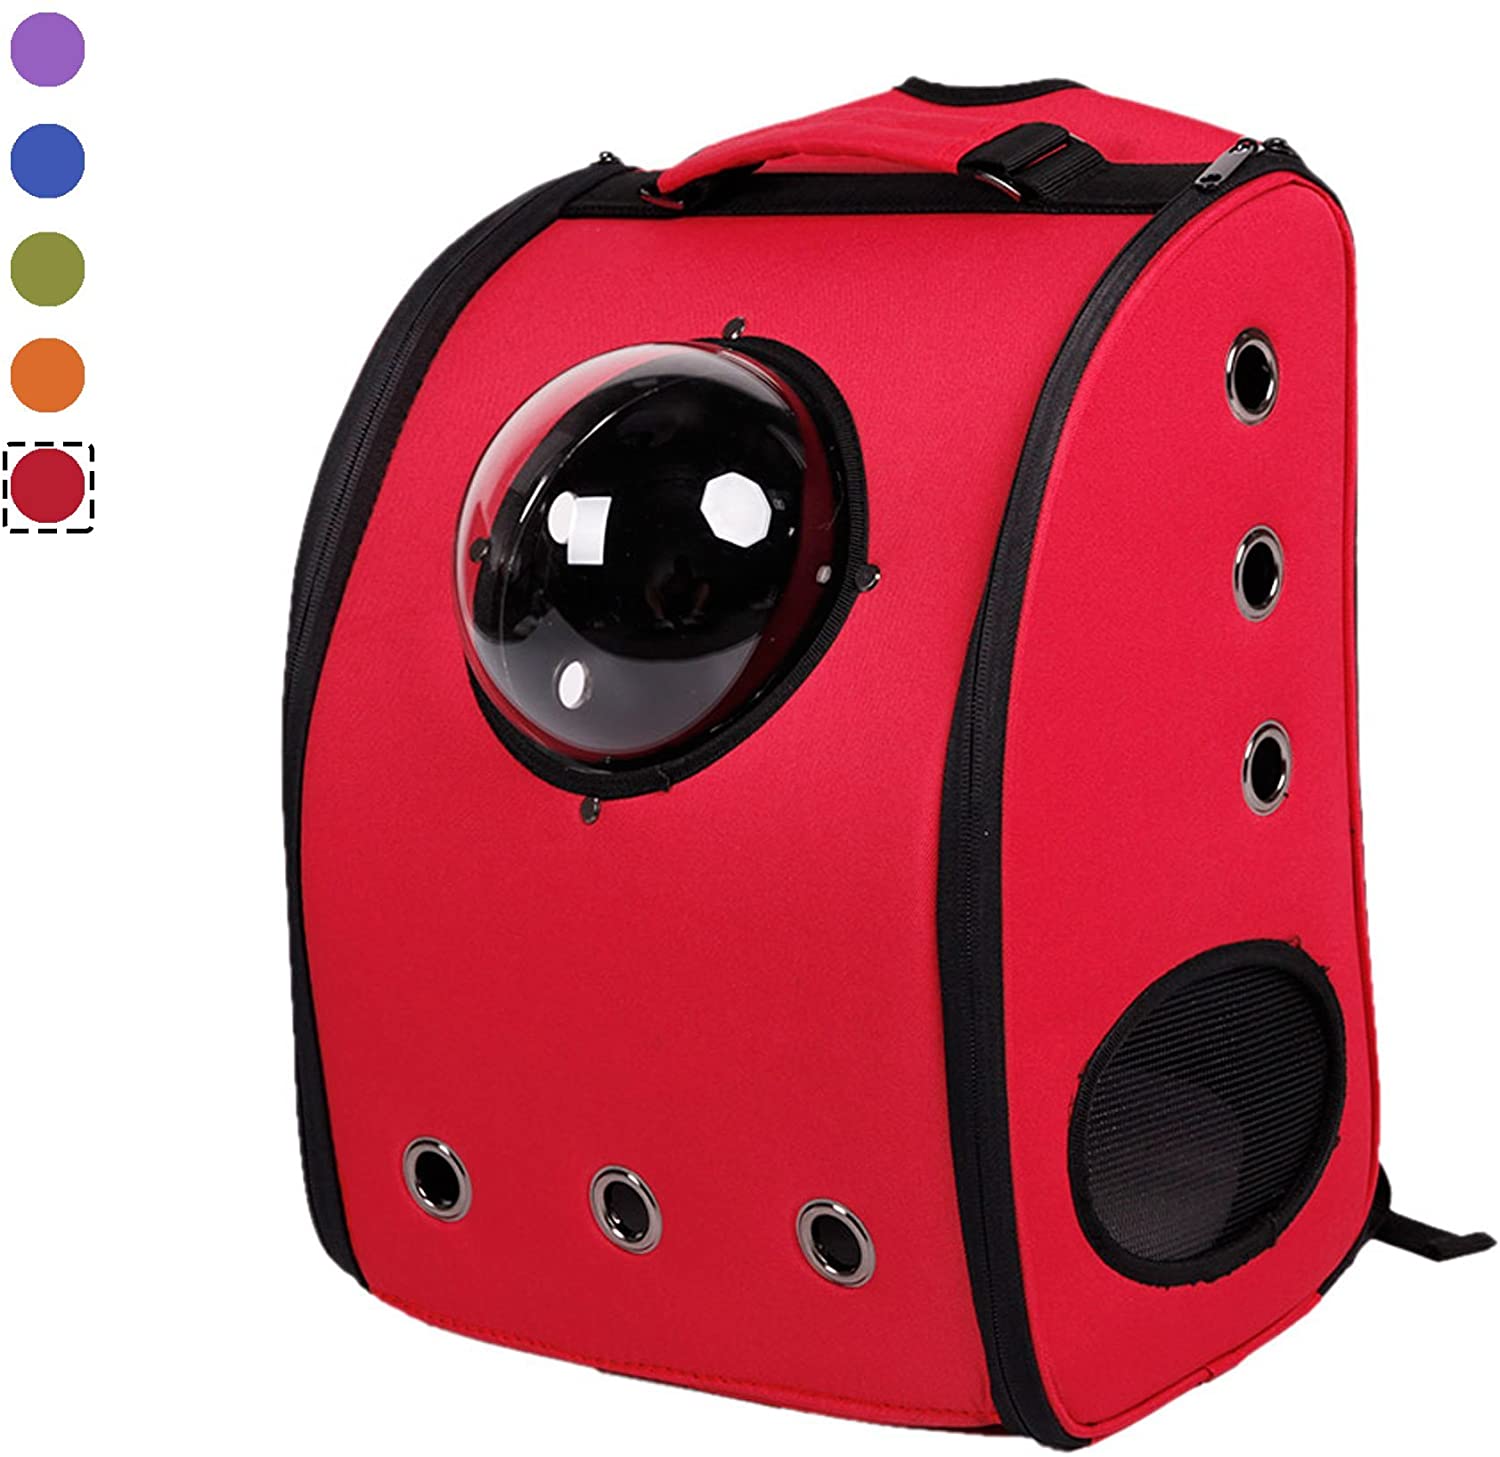 Dog Cat Carrier Backpack Pet Travel Bag Bubble Window Soft Airline Approved for Puppy Kitty, 5 Color